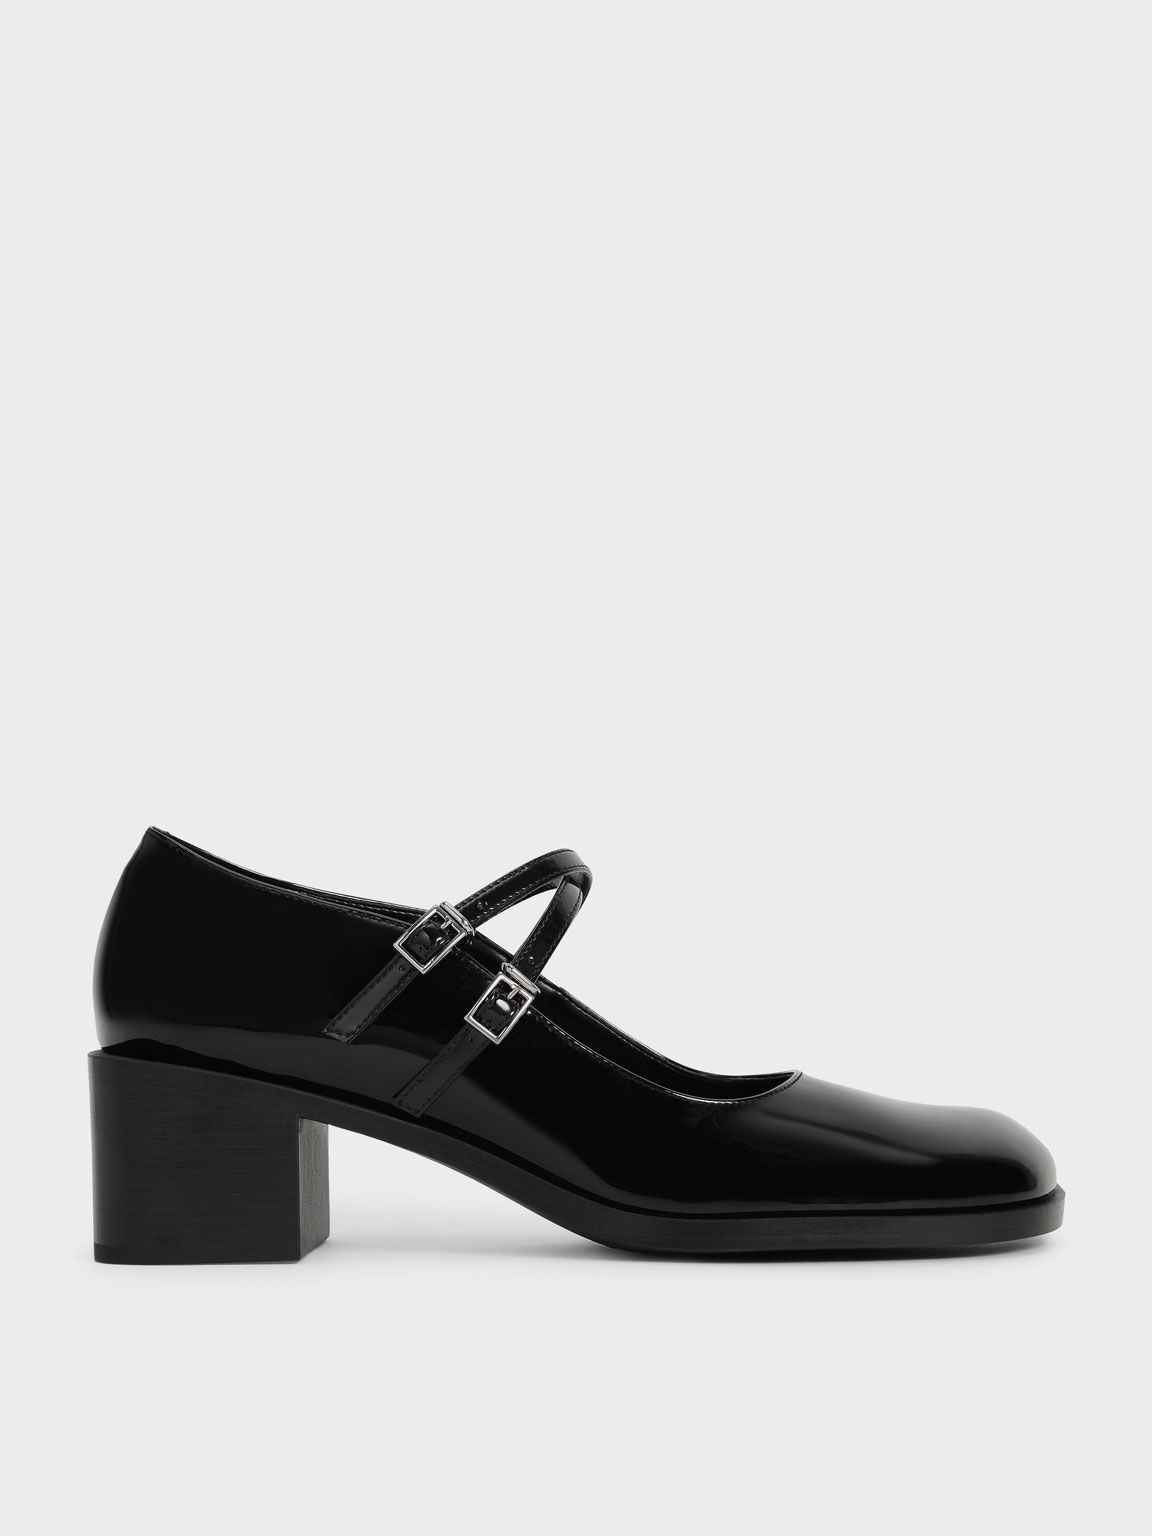 Charles & Keith Heeled Ankle Boots in Black Patent